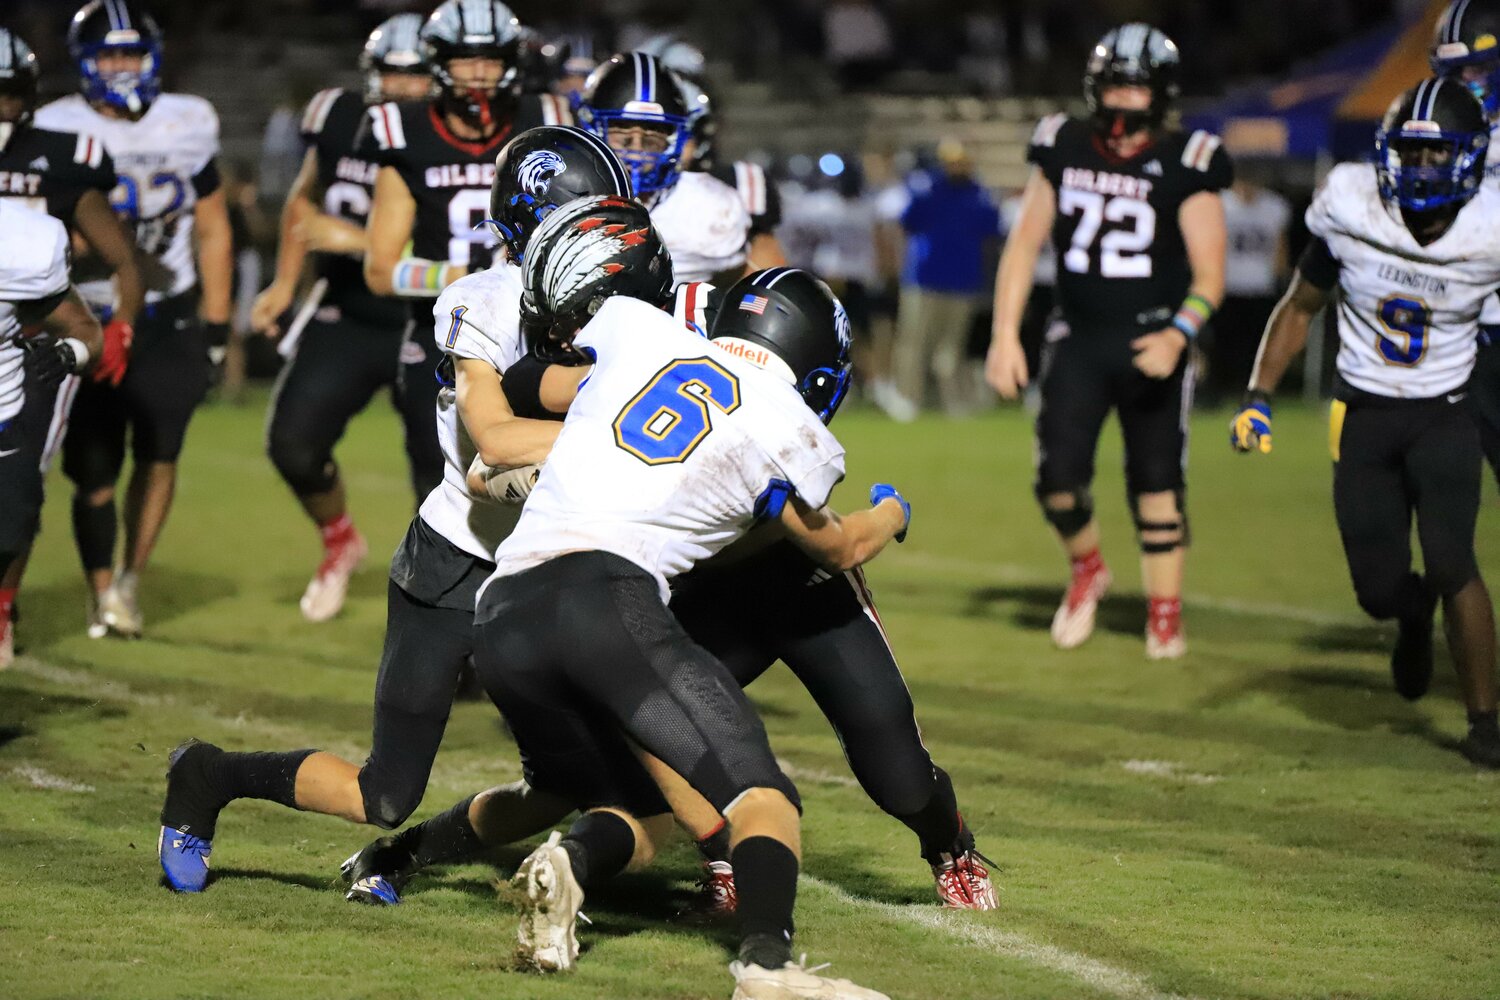 Duke Cleary and Jacob Gepfert team up for a tackle.